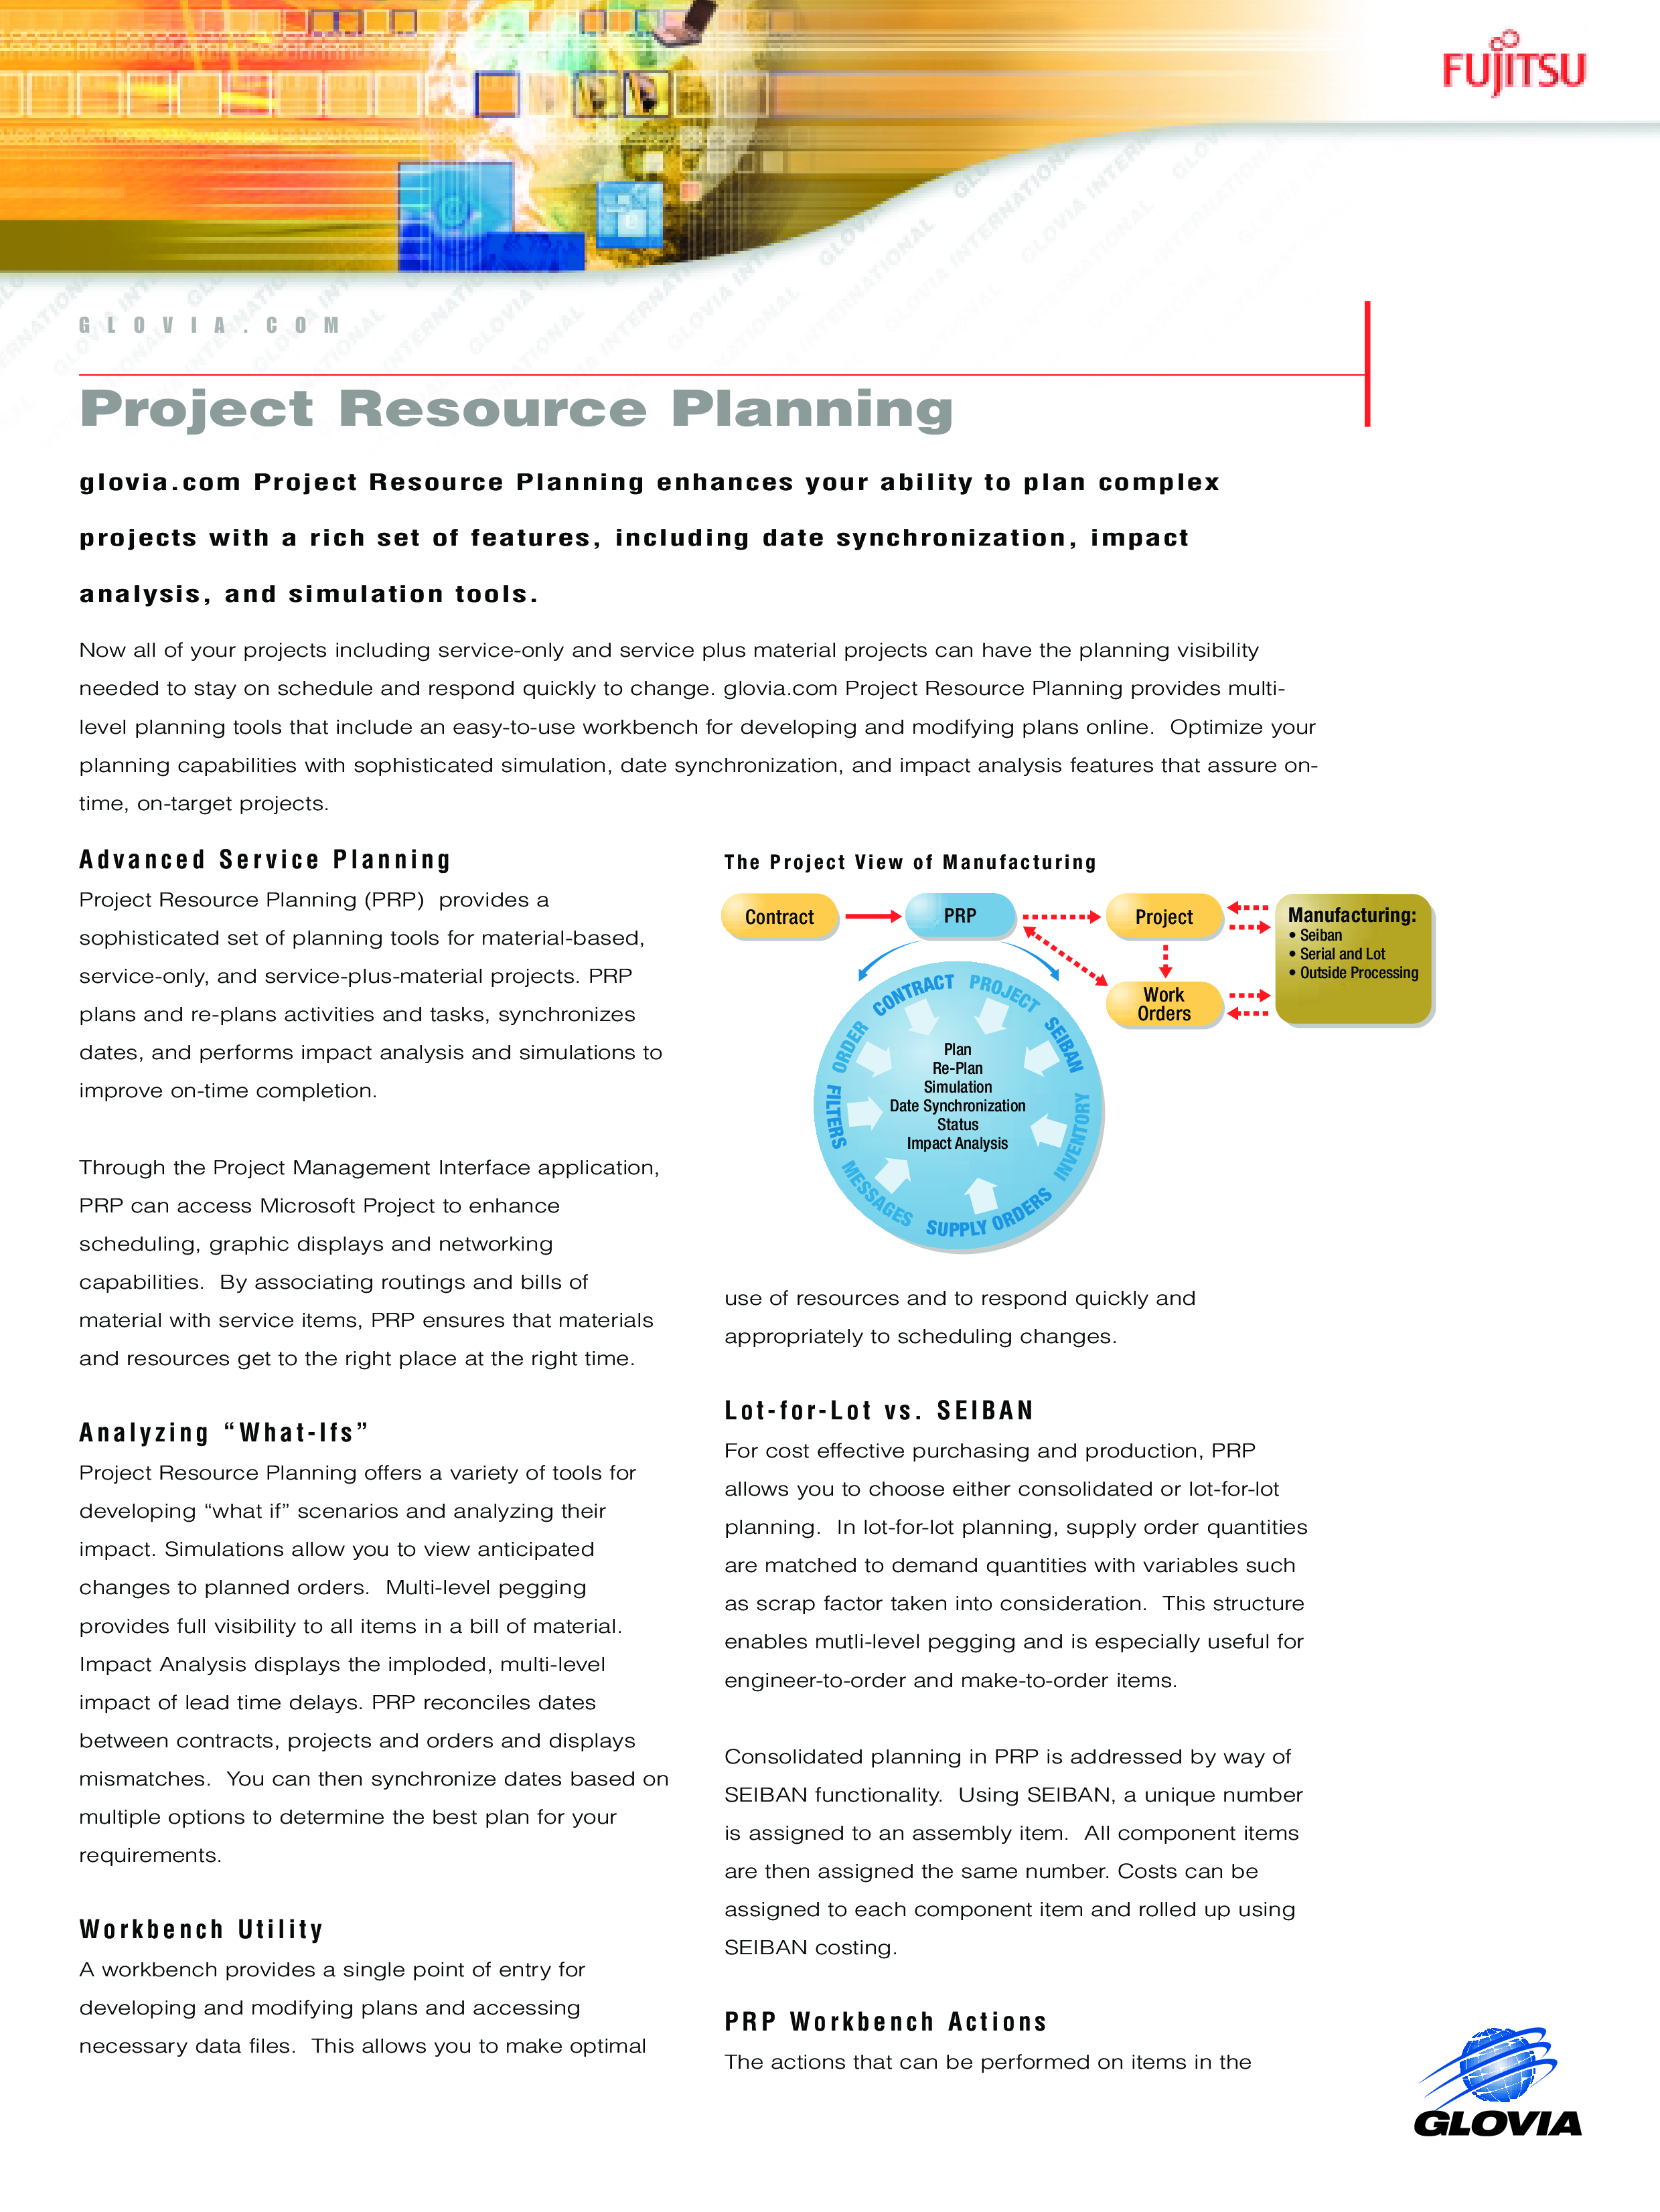 Project Resource Planning main image